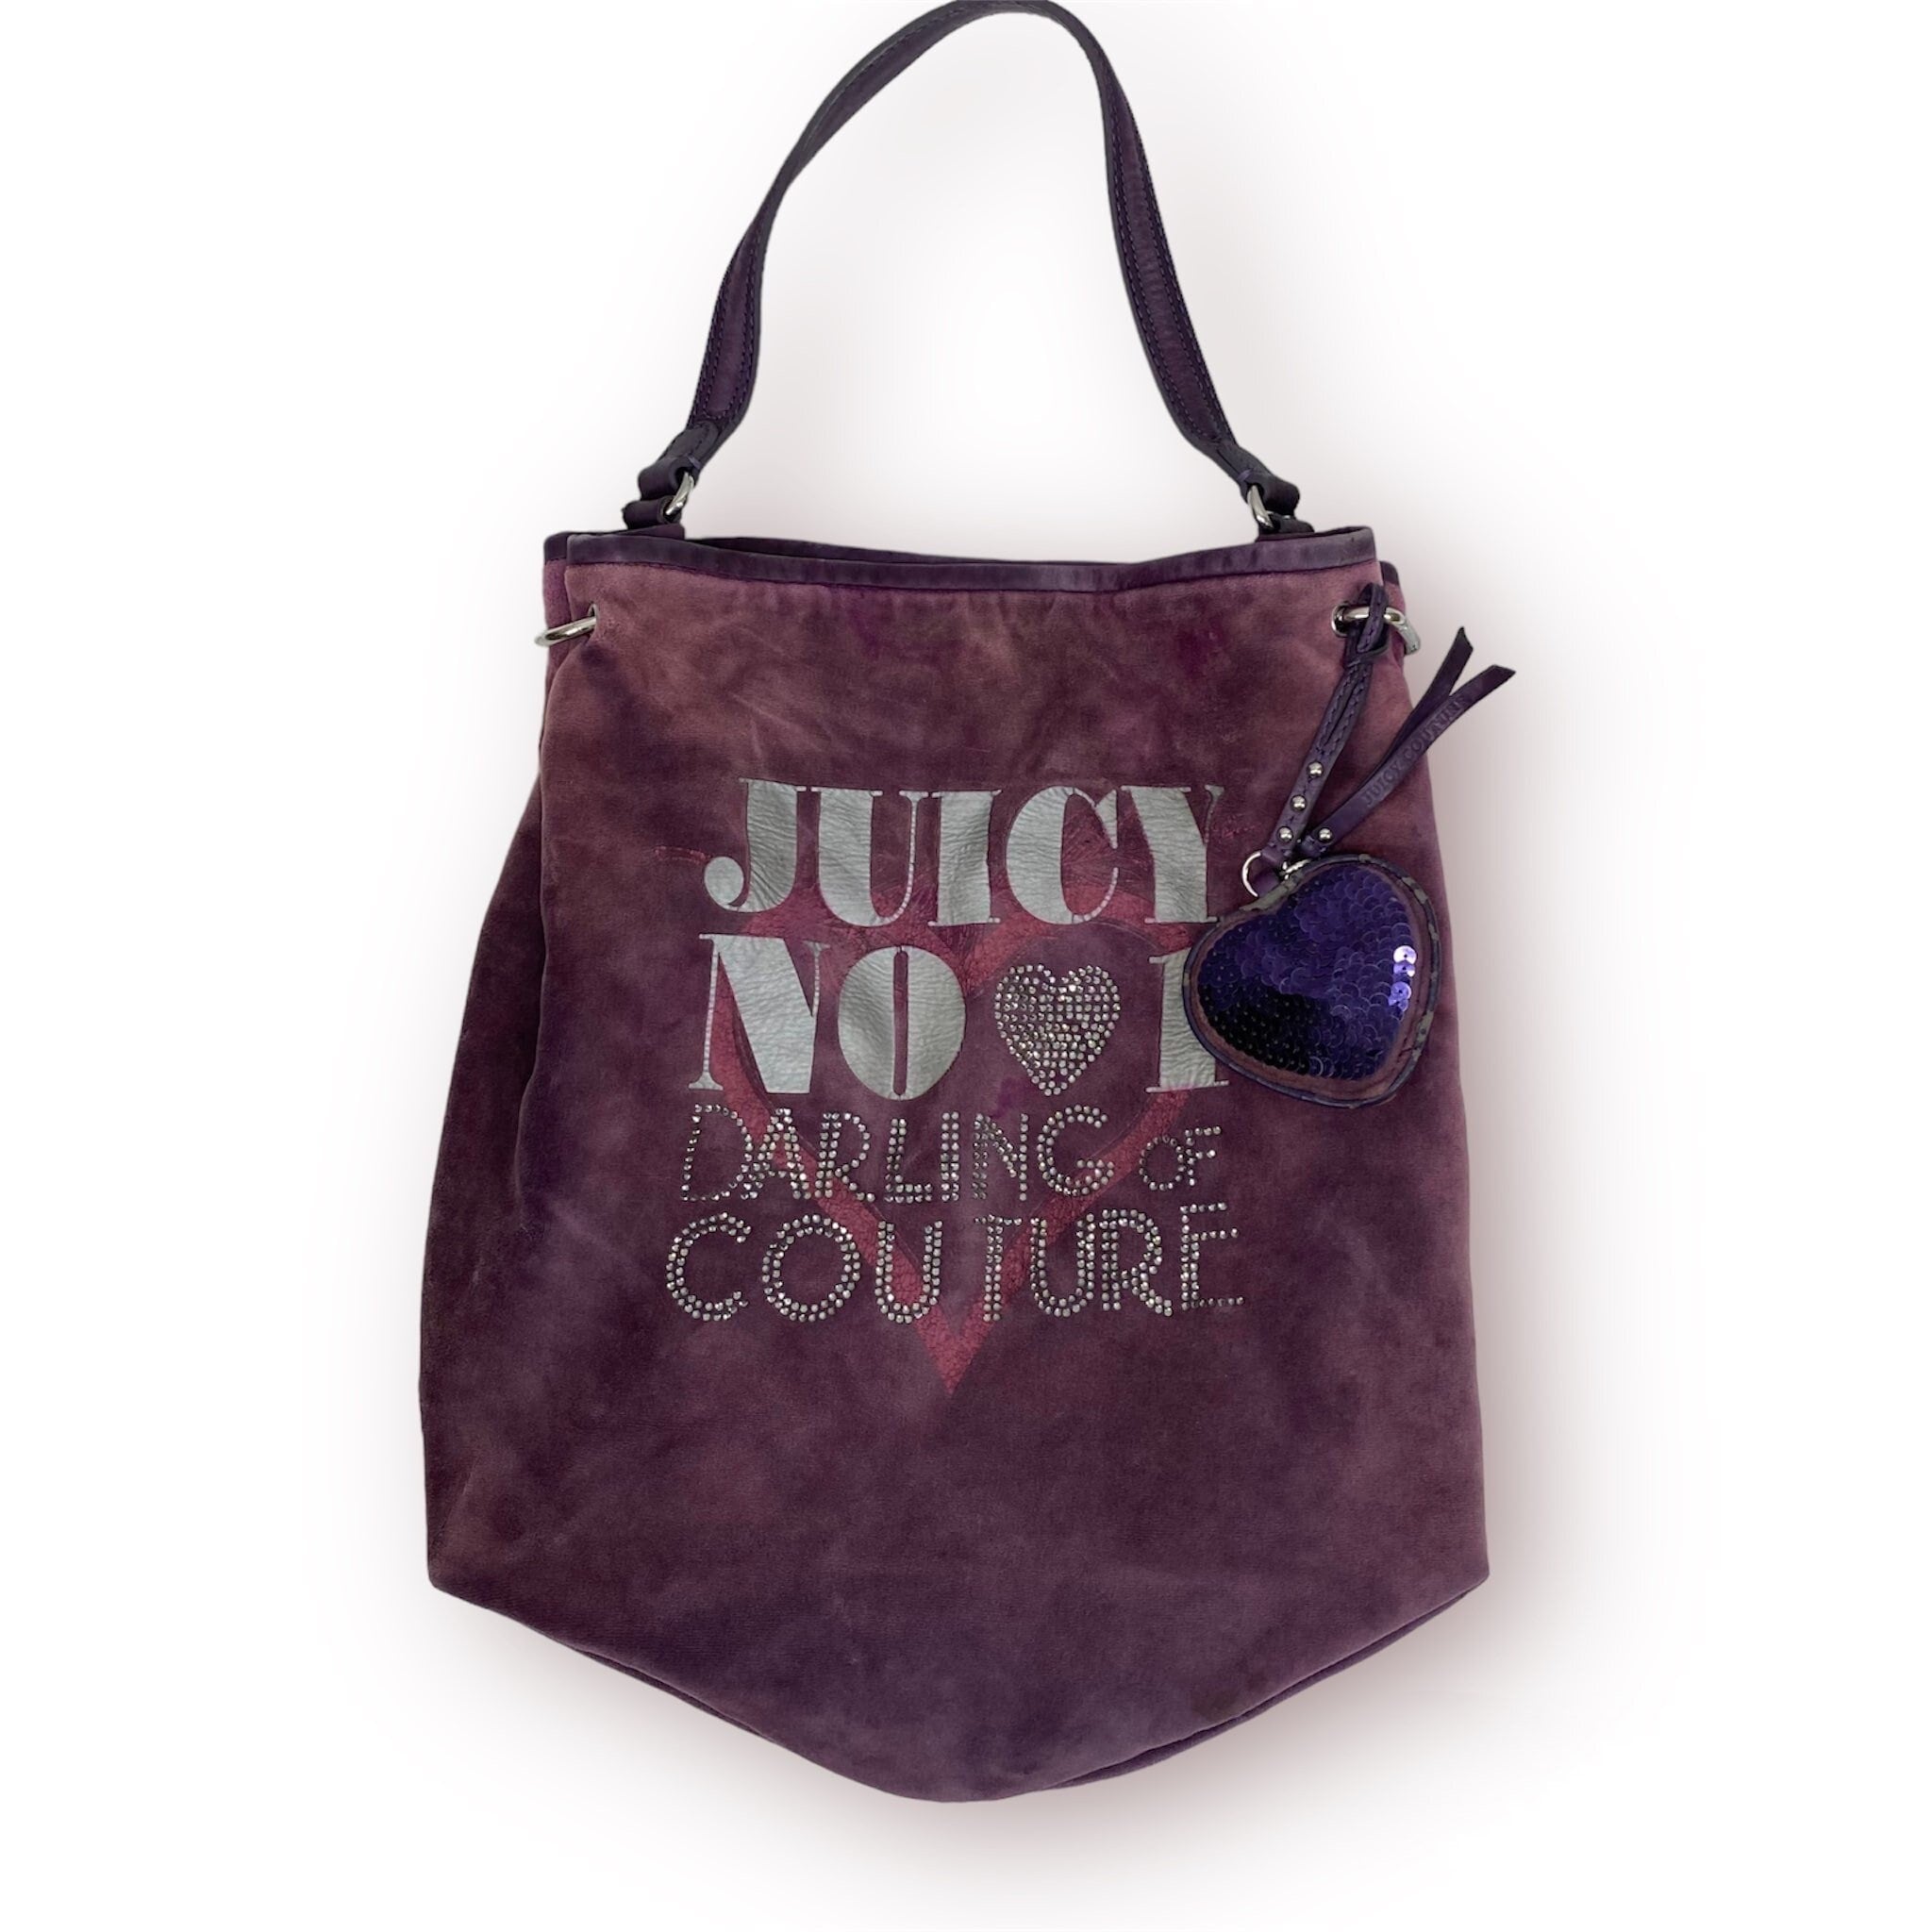 Juicy Couture Purse-7”x8” Purple Terry Cloth Shoulder Bag W/ Pink Lining-  Sequin | eBay